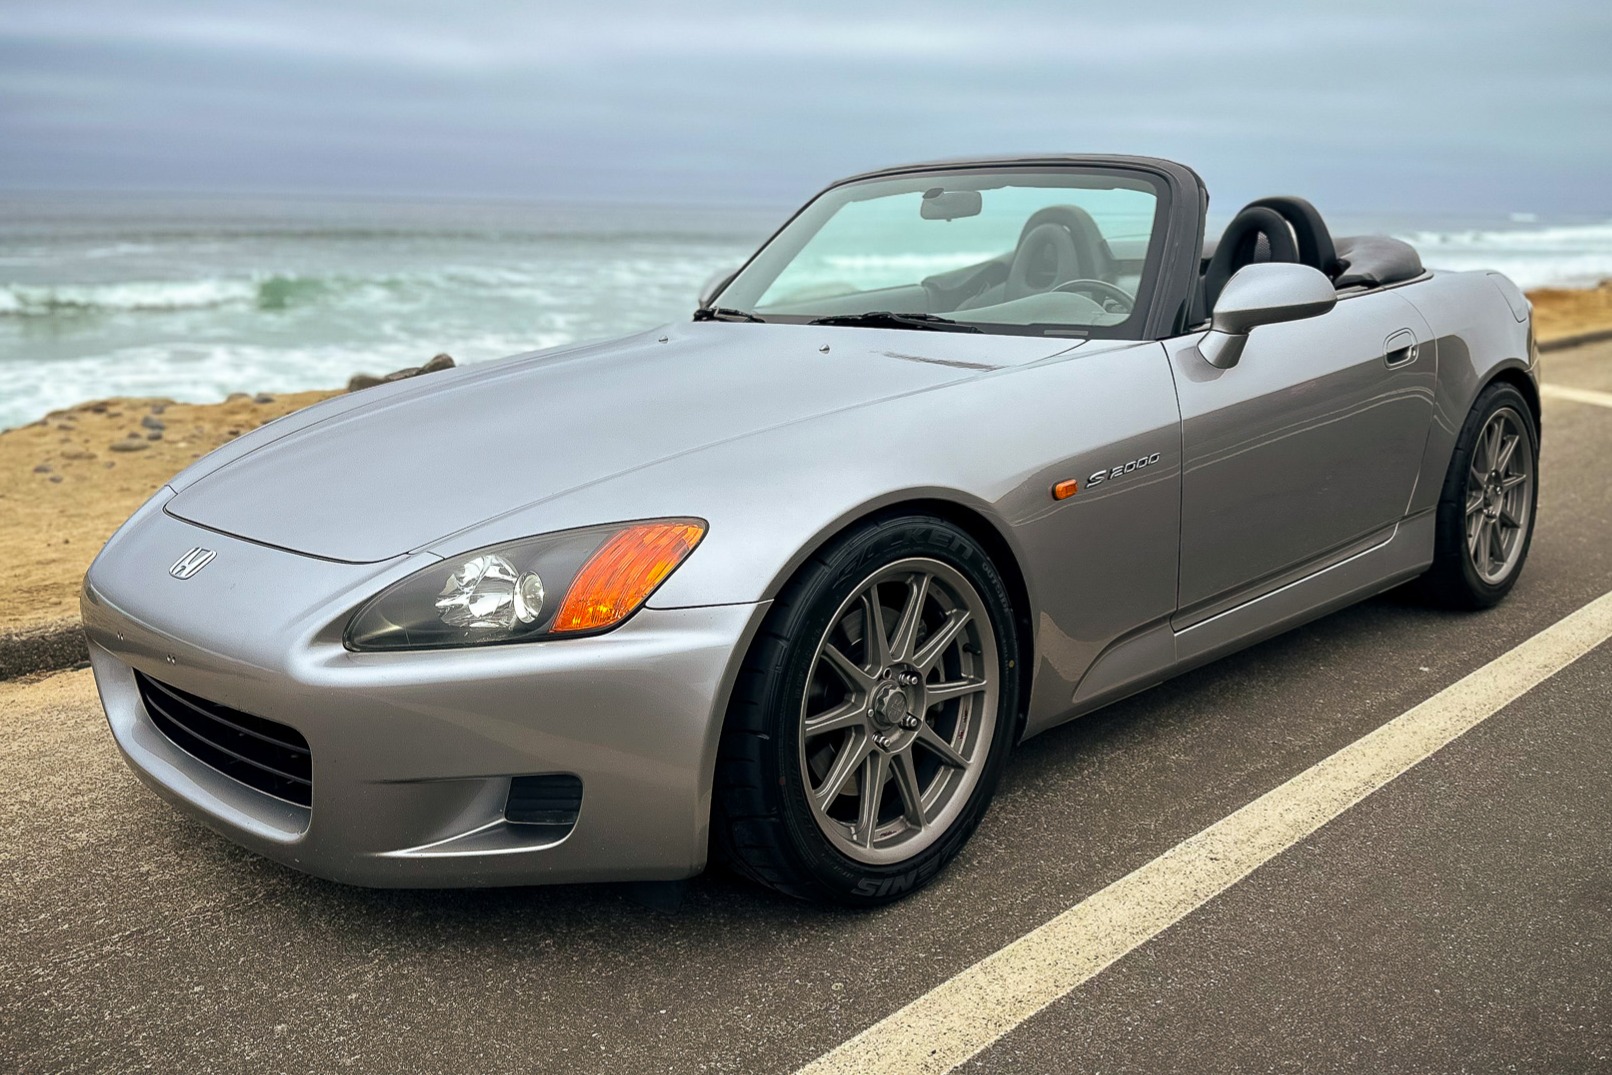 Used One-Owner 2003 Honda S2000 Review